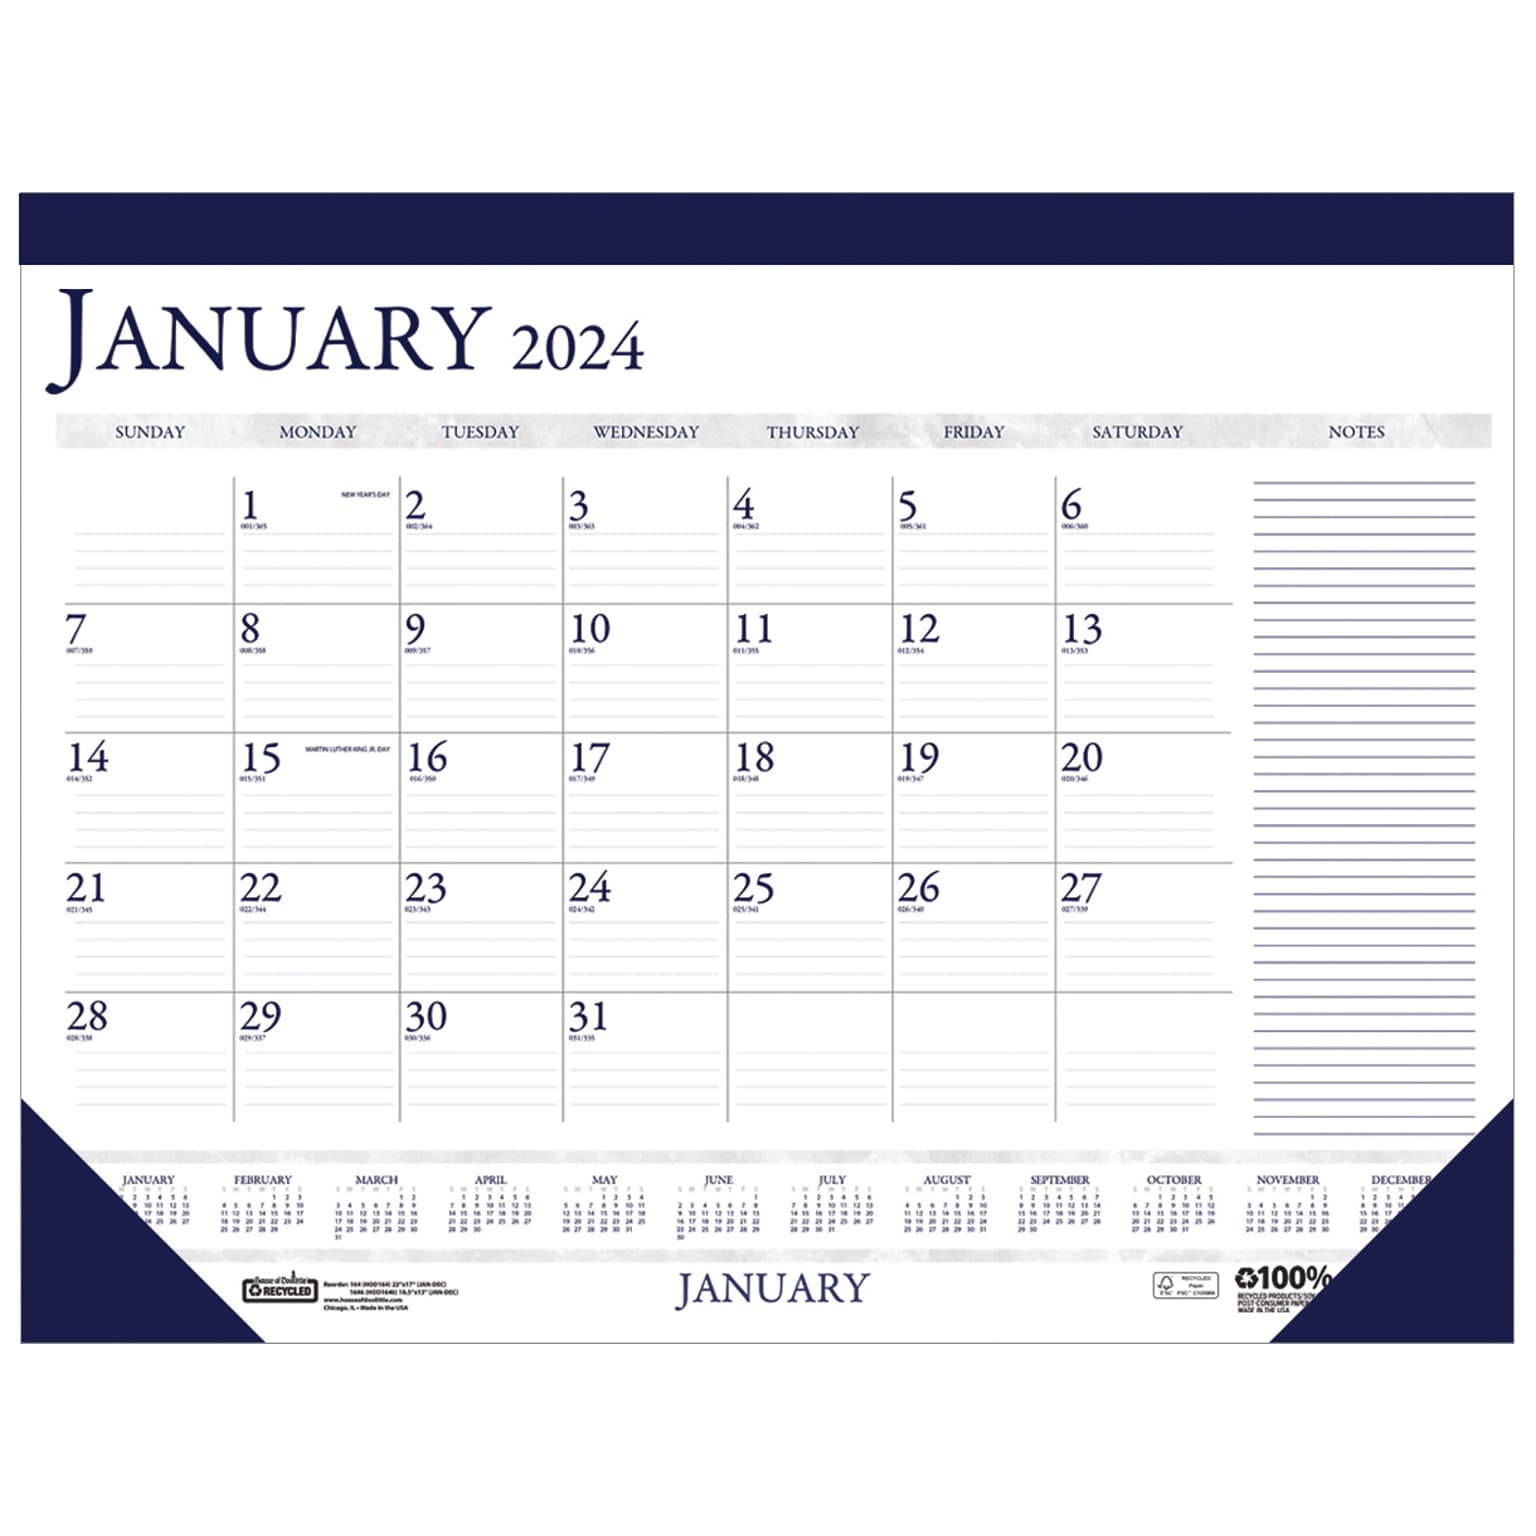 2024 House of Doolittle Compact 18.5 x 13 Monthly Desk Pad Calendar, White/Blue (1646-24)